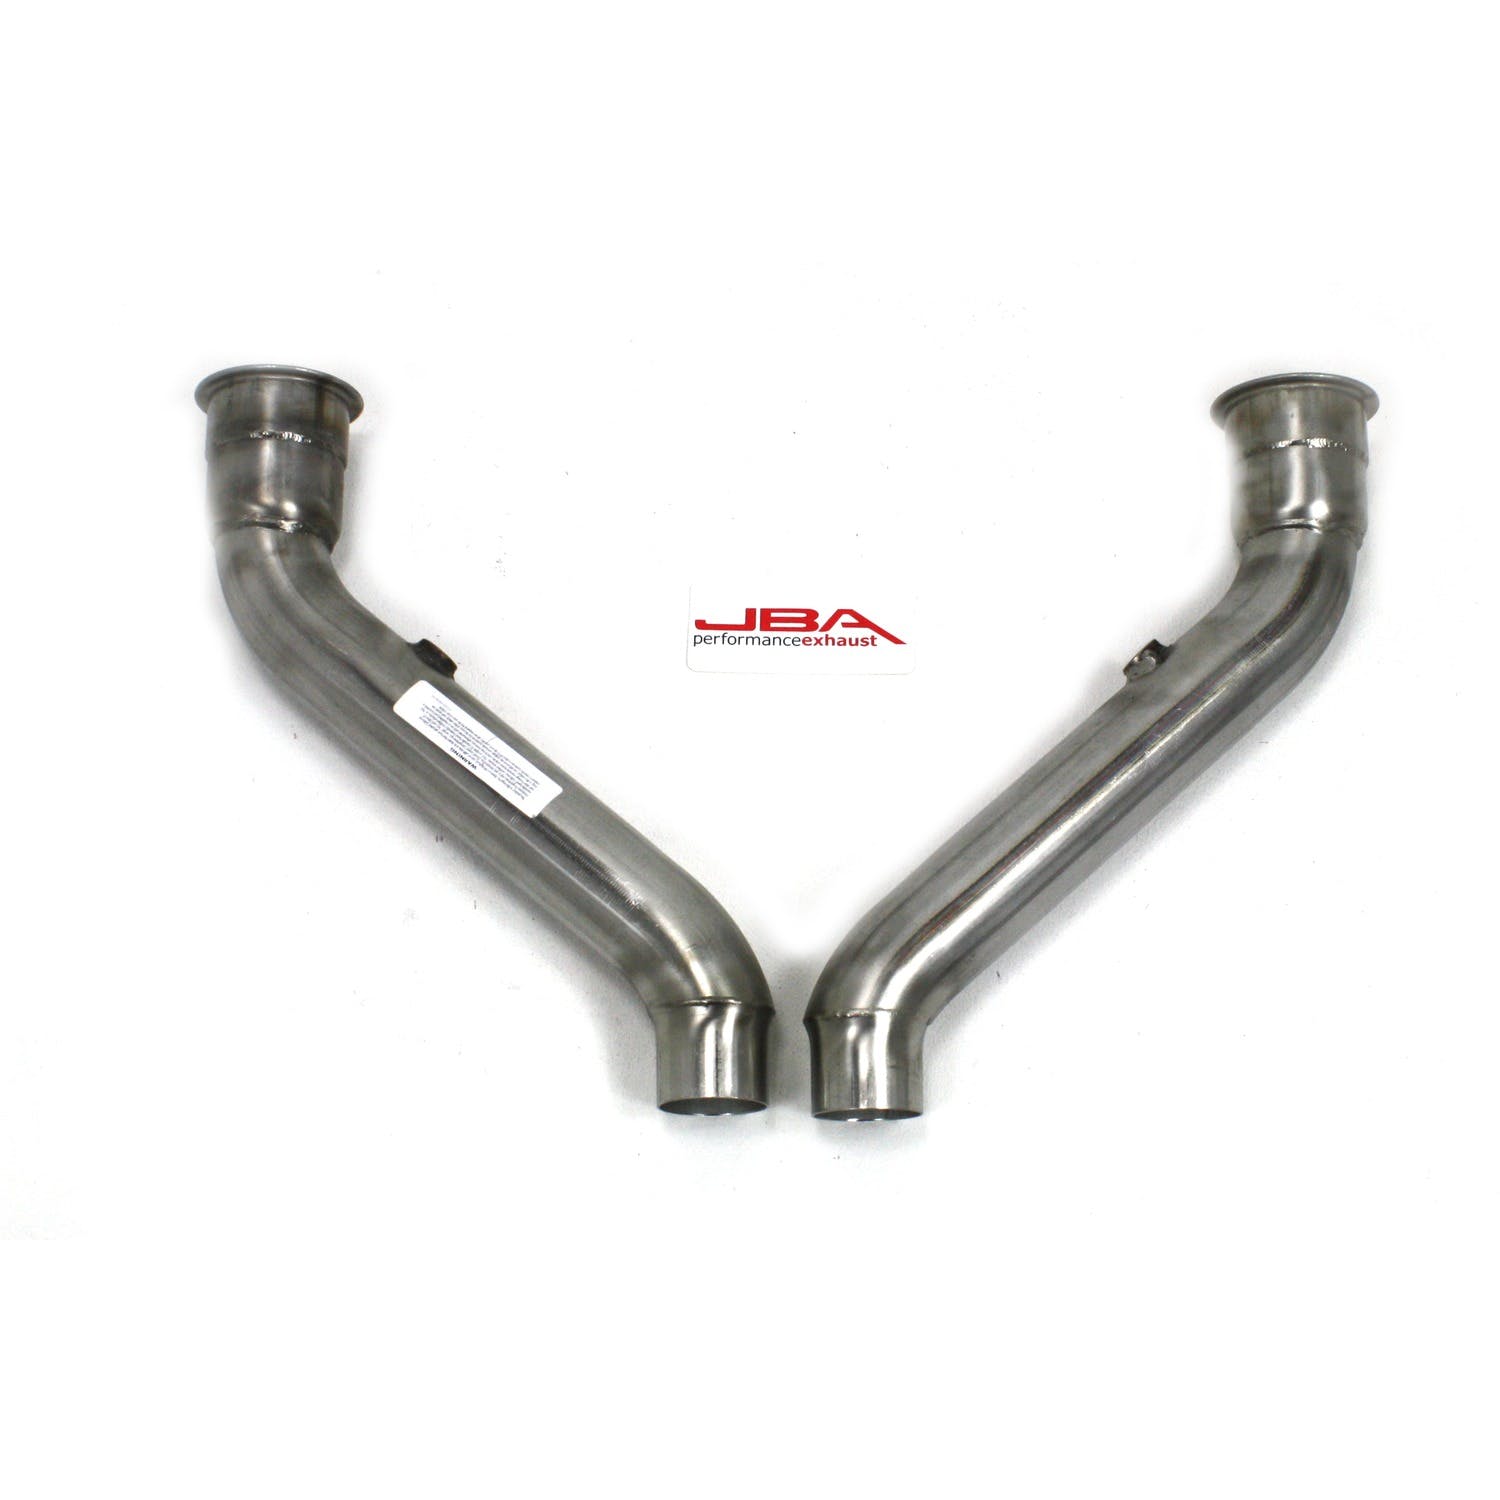 JBA Performance Exhaust 6689SD Mid-Pipe, 15 Mustang 5.0L